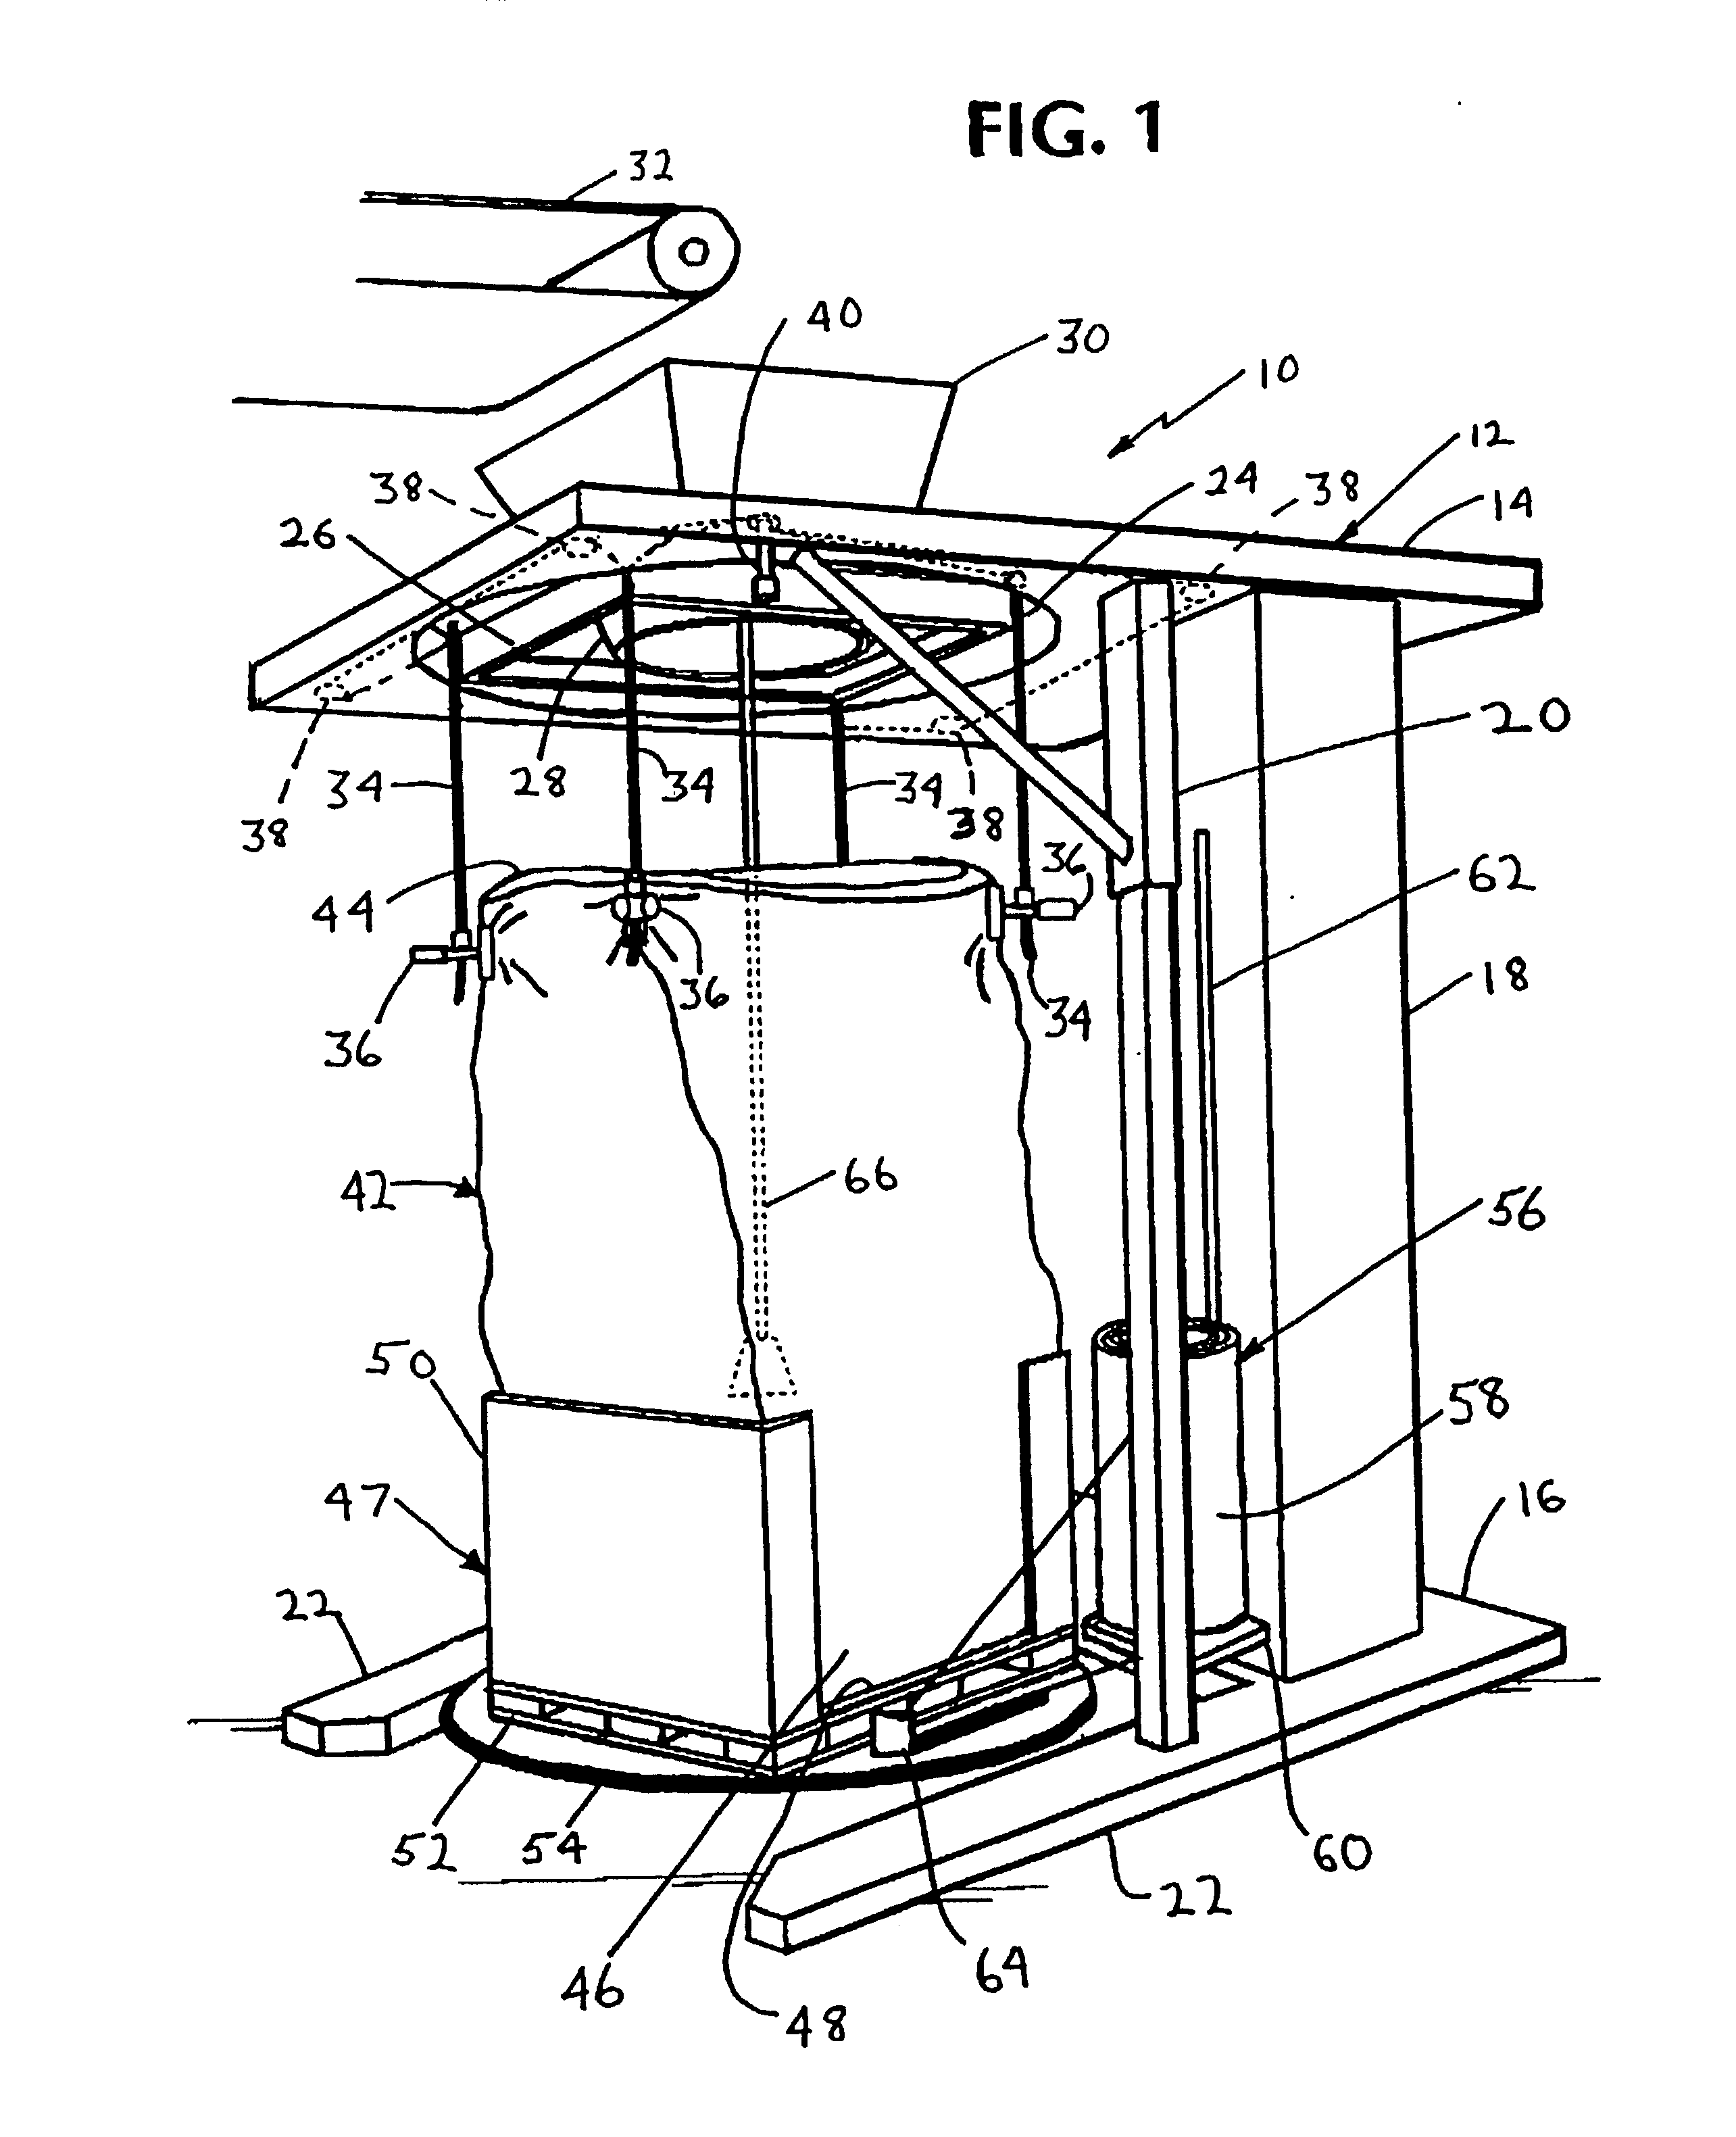 Transportable container for bulk goods and method for forming the container